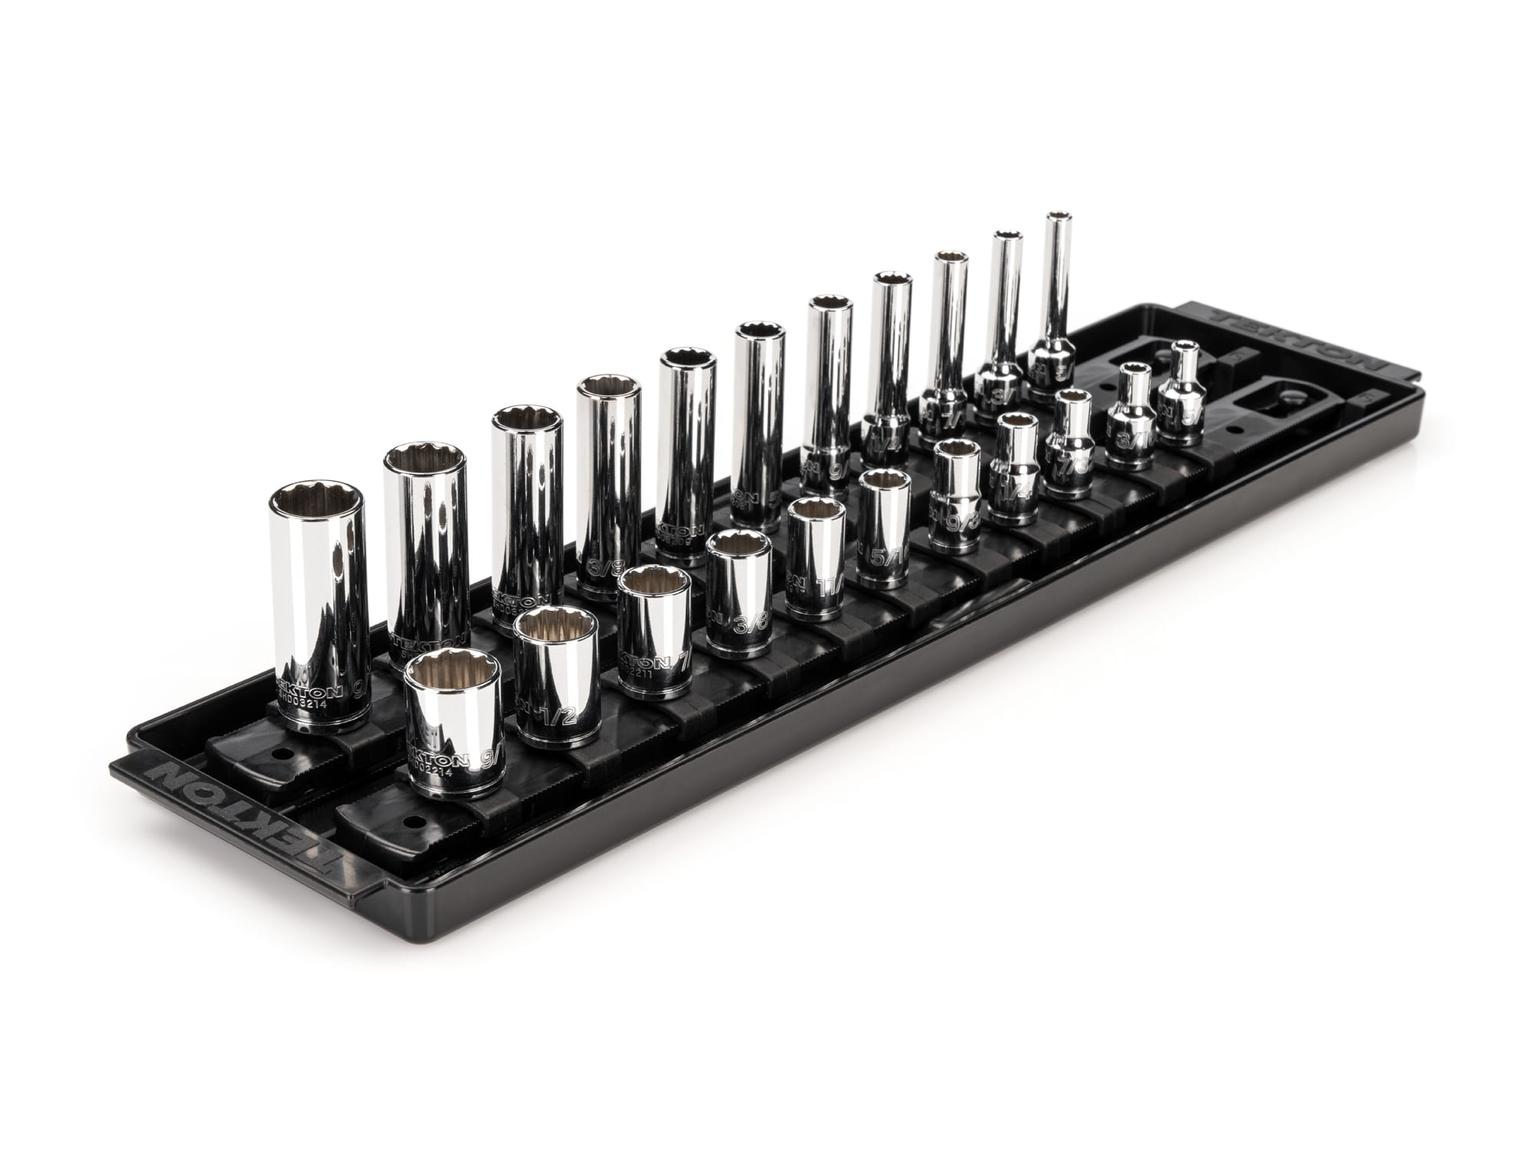 TEKTON SHD90213-T 1/4 Inch Drive 12-Point Socket Set with Rails, 22-Piece (5/32-9/16 in.)